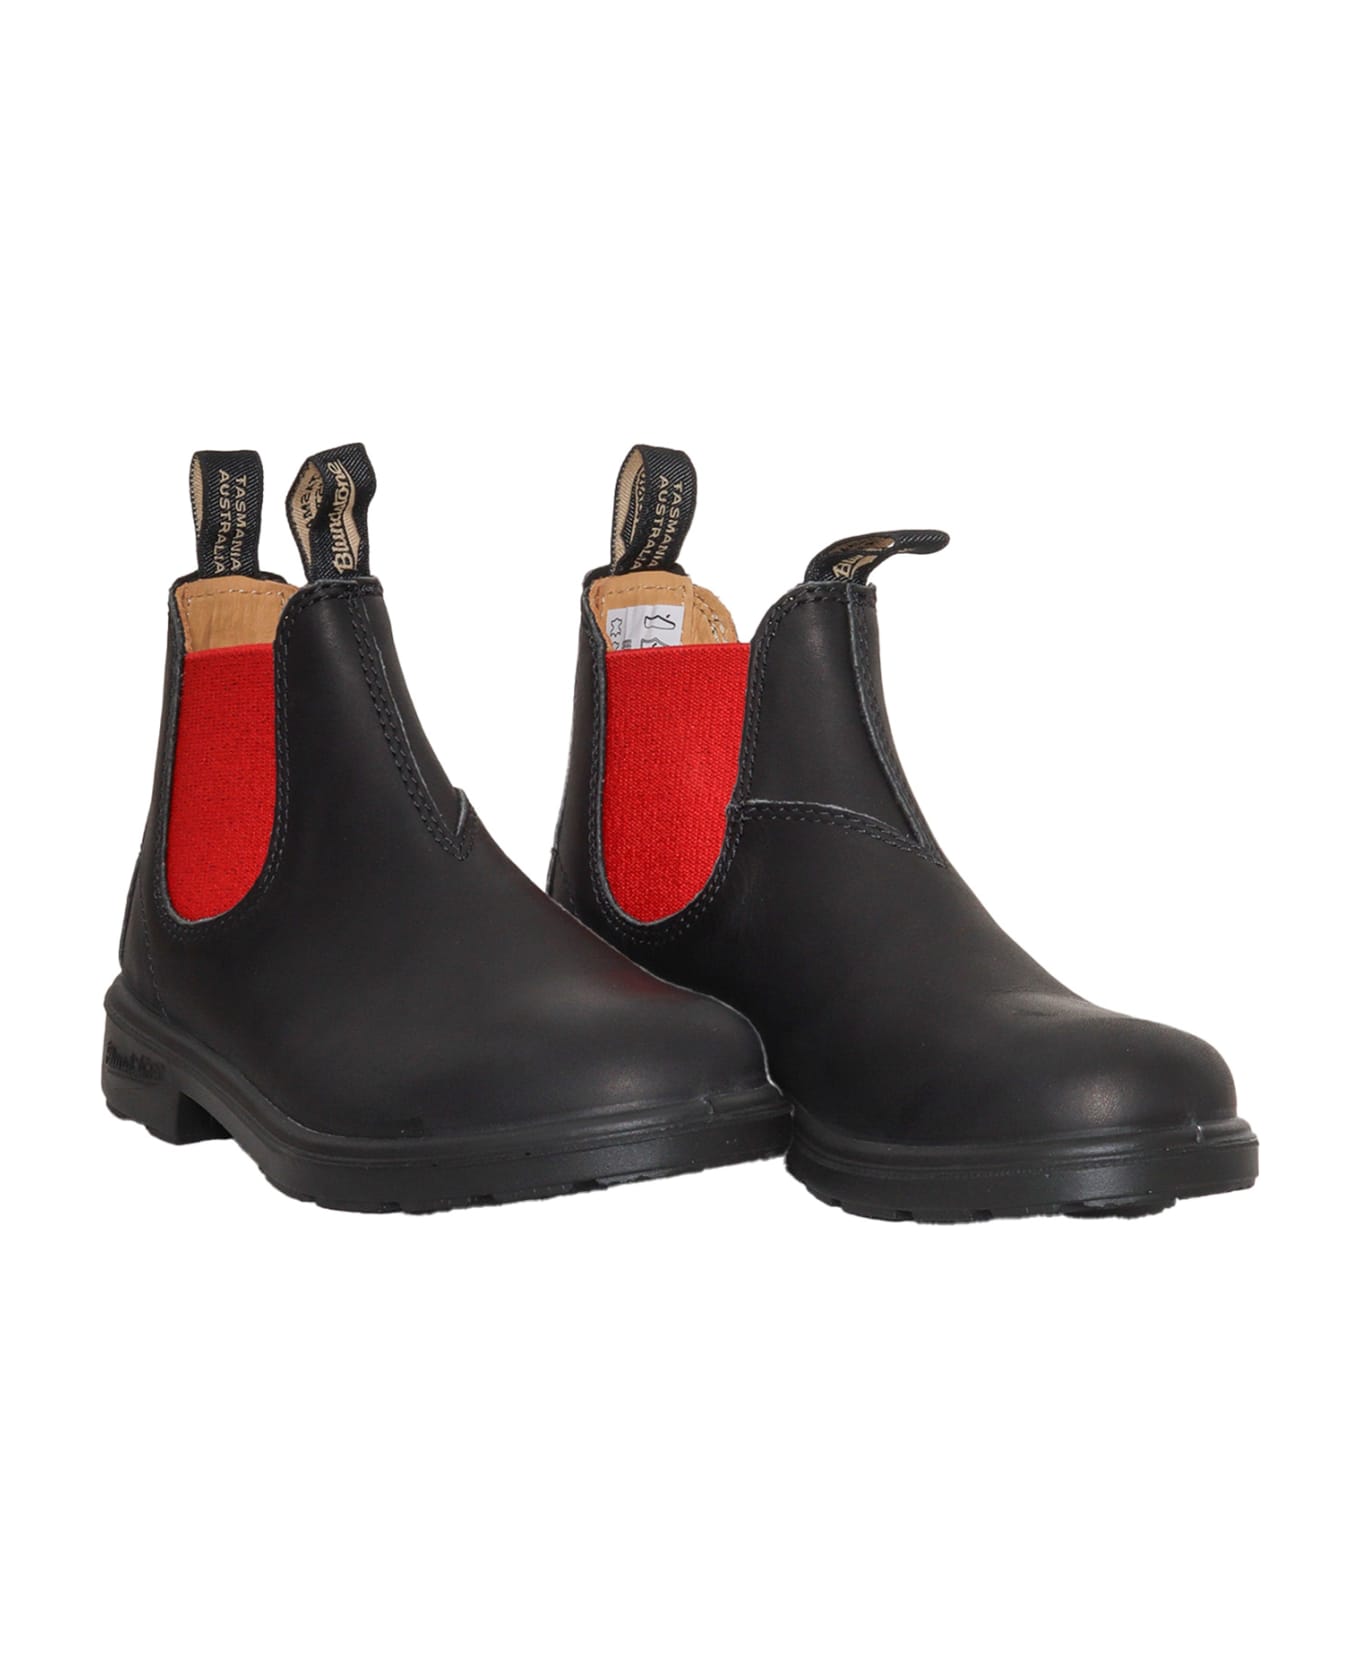 Blundstone 581 Ankle Boots - BLACK